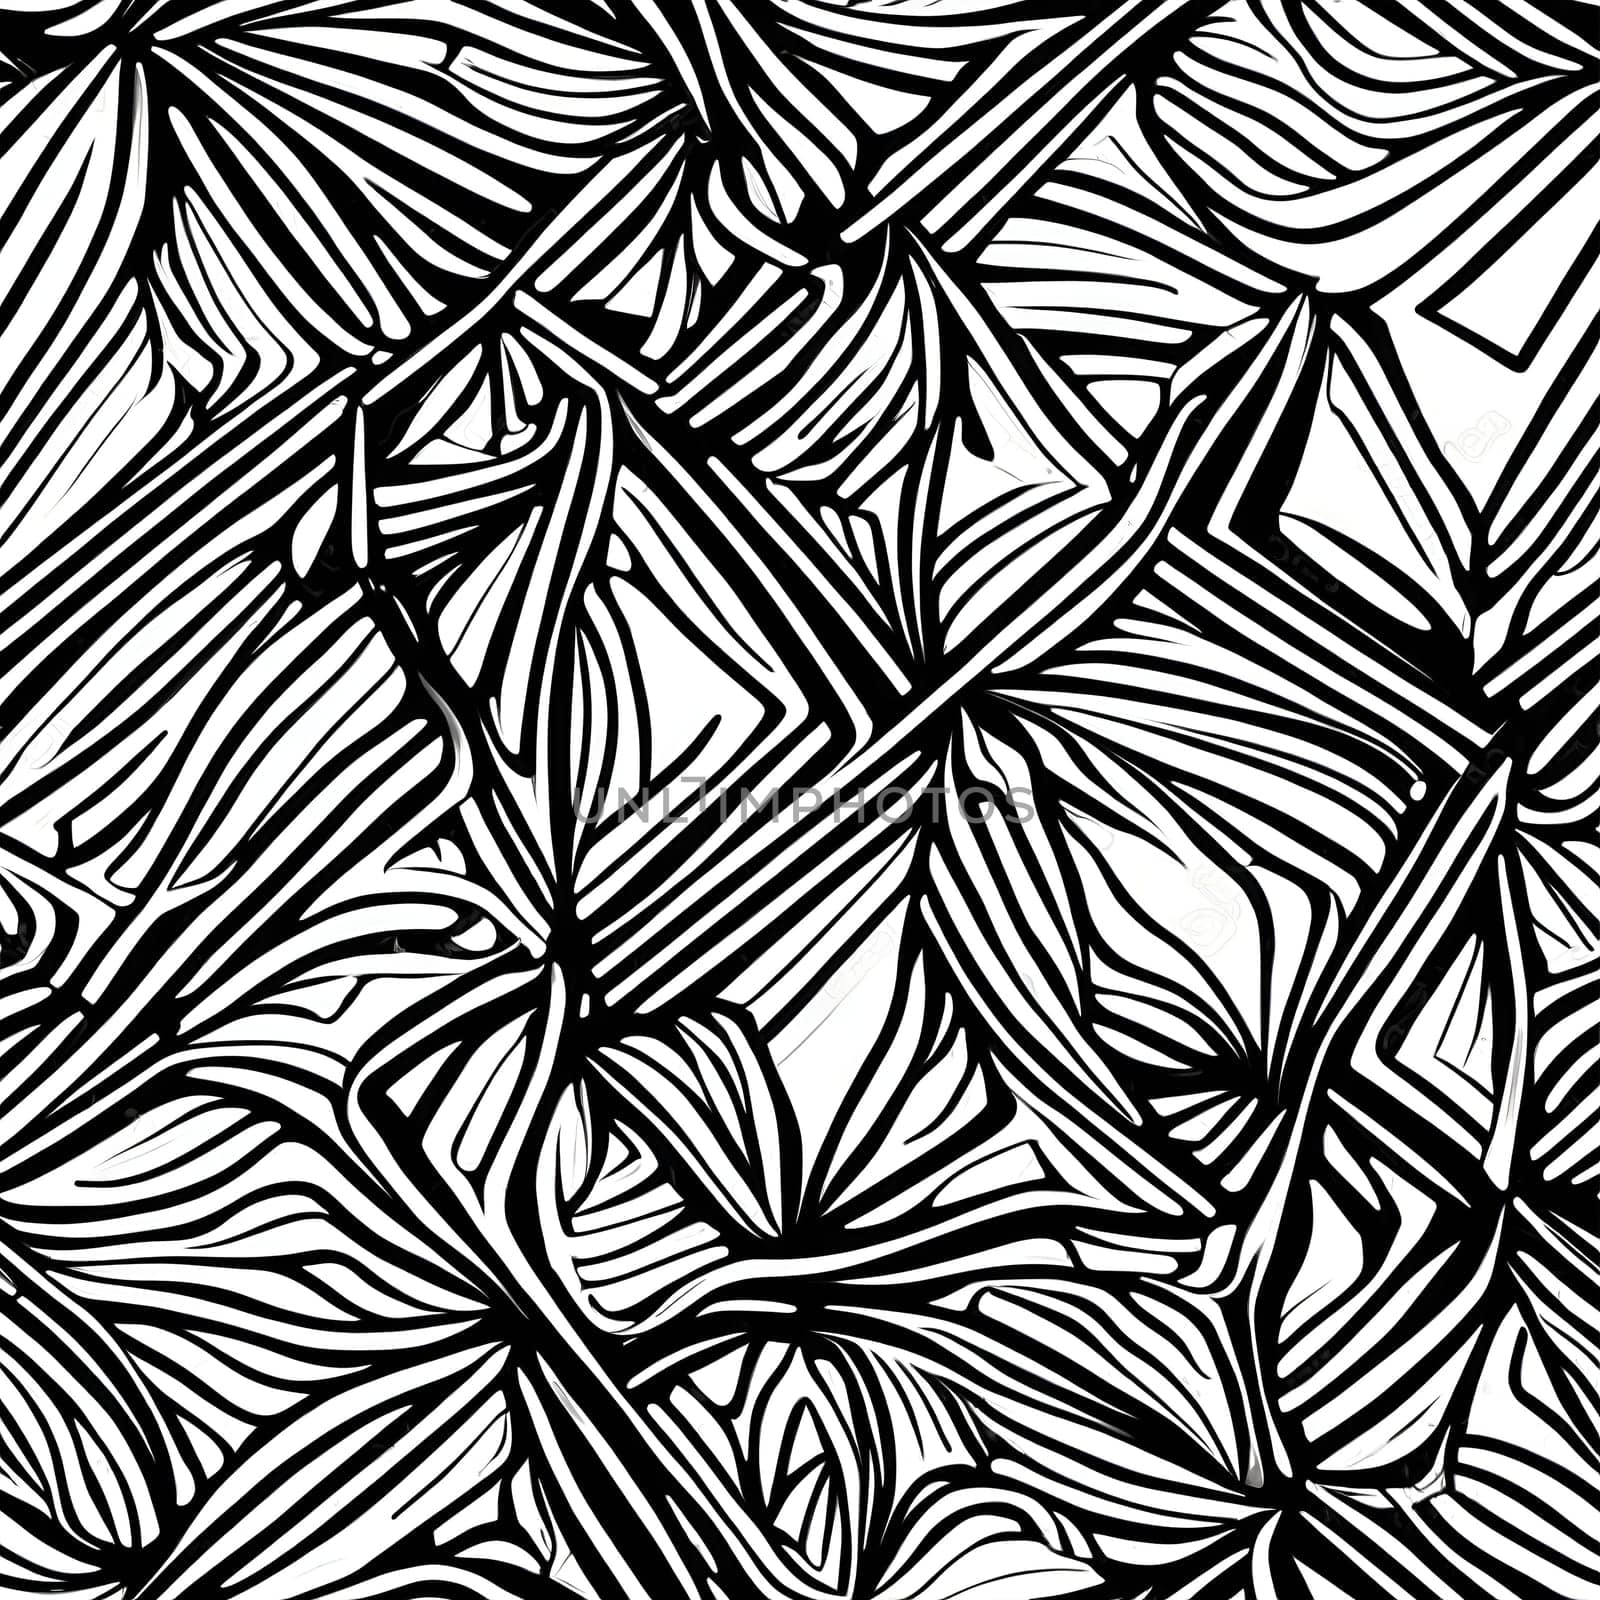 A detailed and intricate black and white design, creating a seamless pattern.